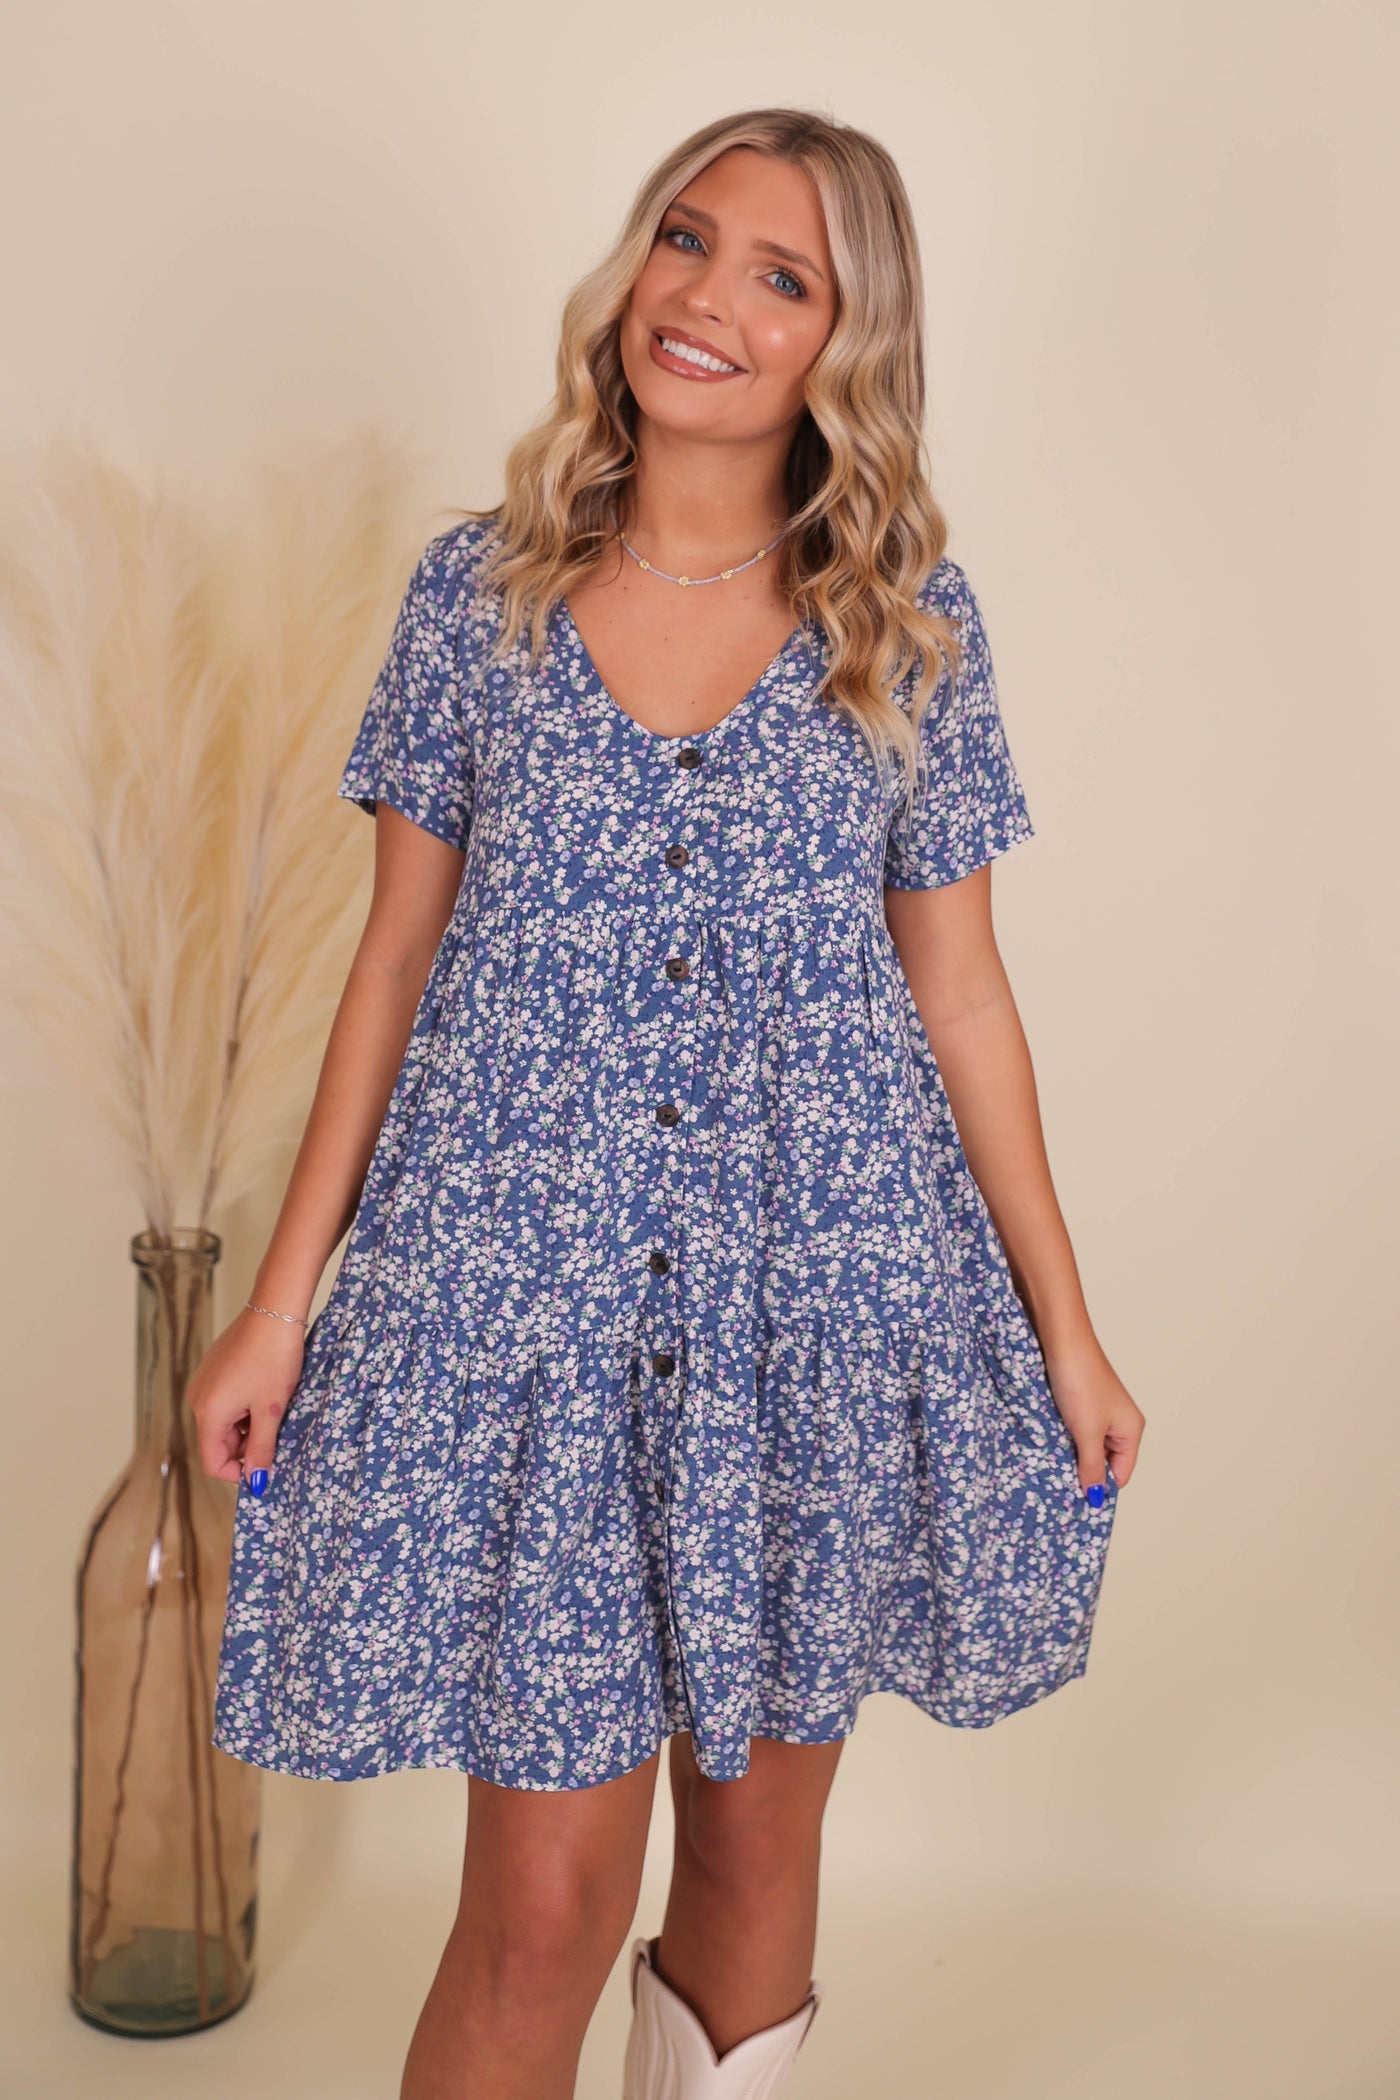 Dainty Floral Print Dress- Tiered Babydoll Doll Dress- Tiered Dress With Buttons